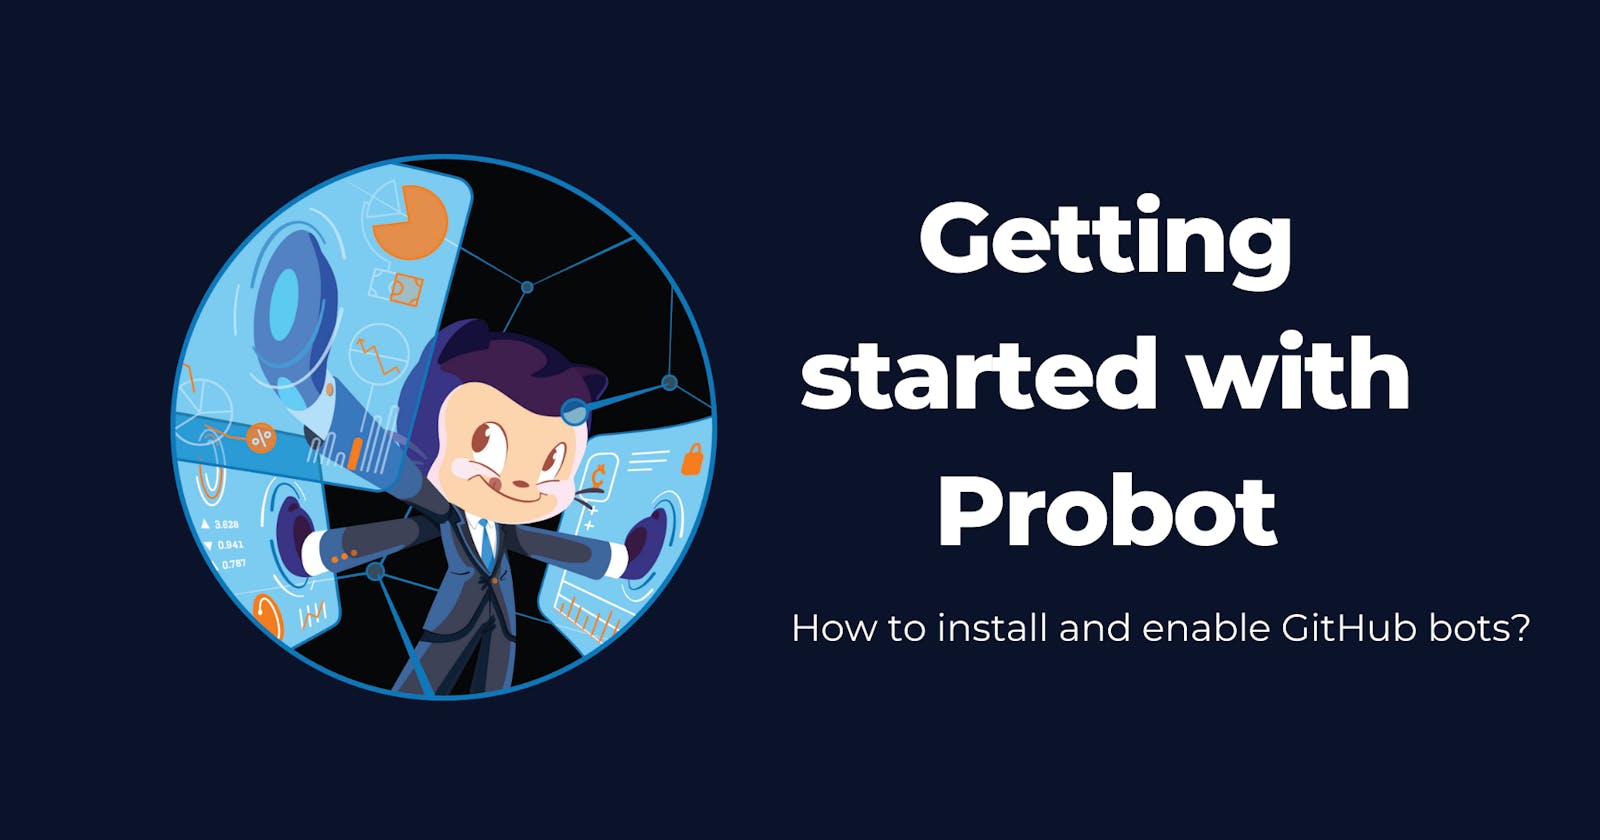 Getting started with Probot